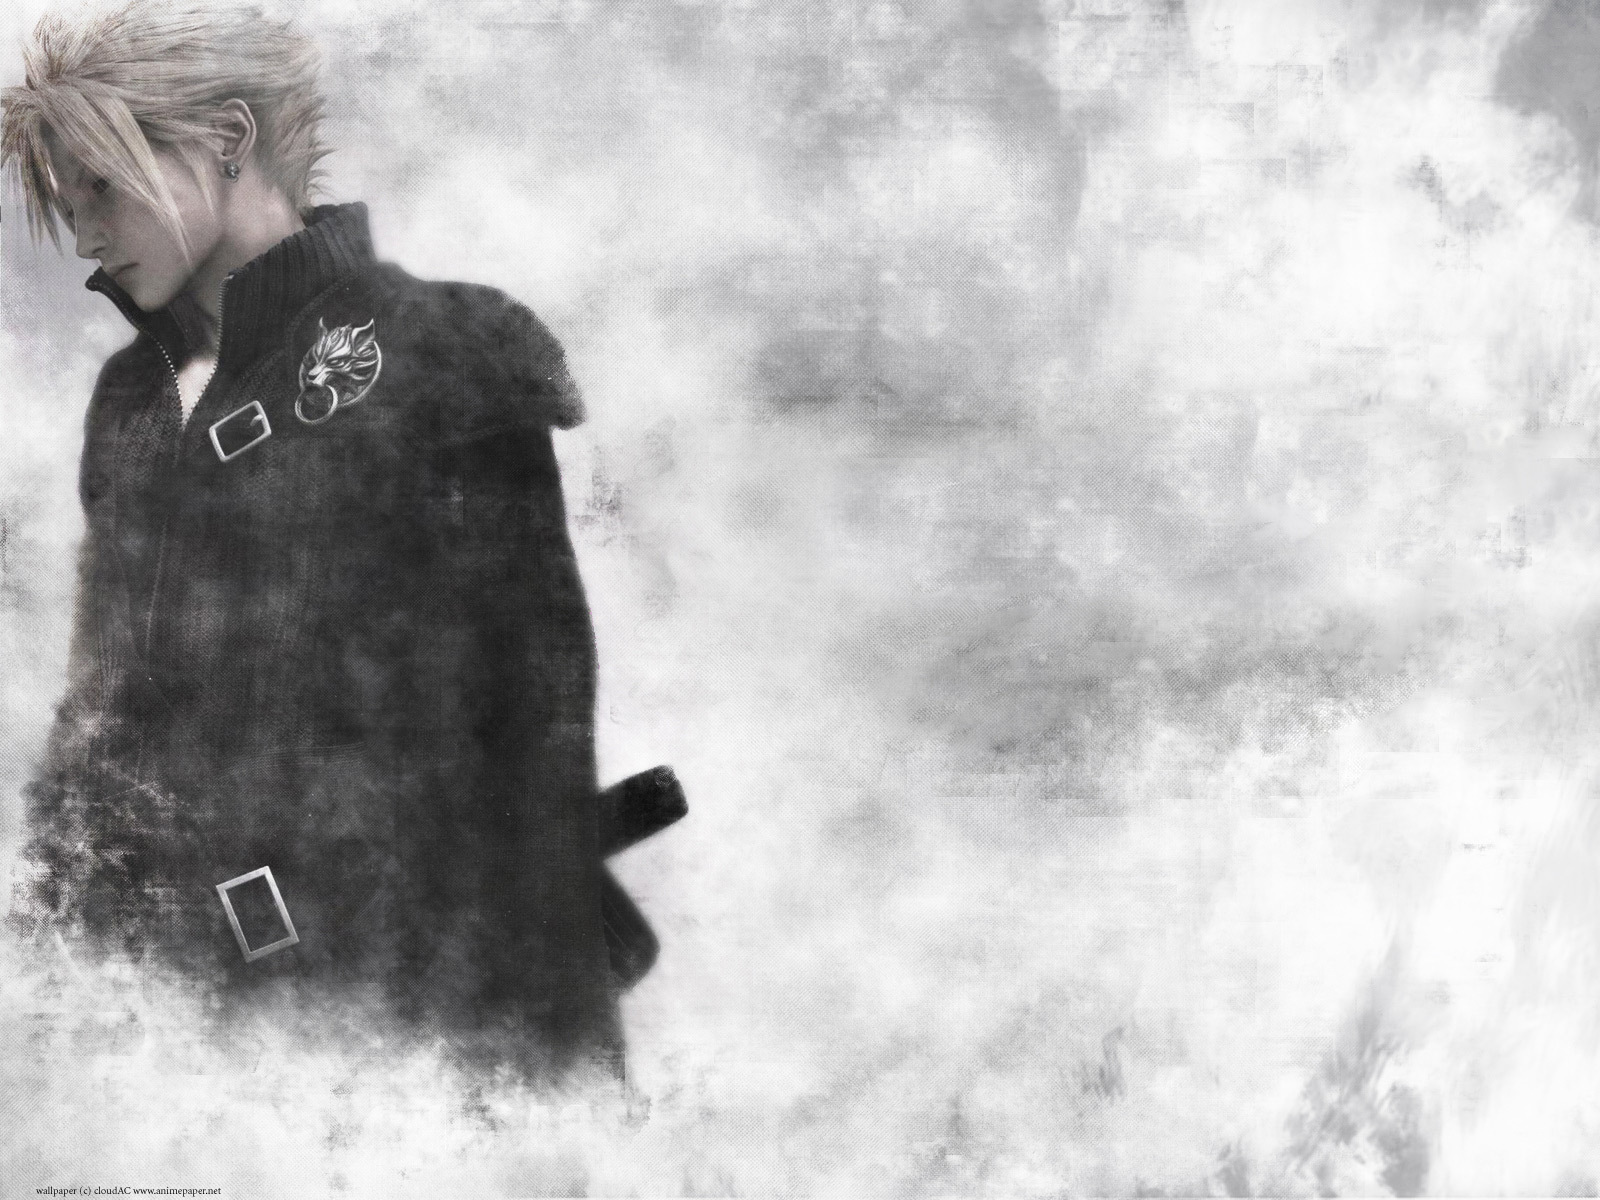 Cloud Strife images final fantasy 7 HD wallpaper and